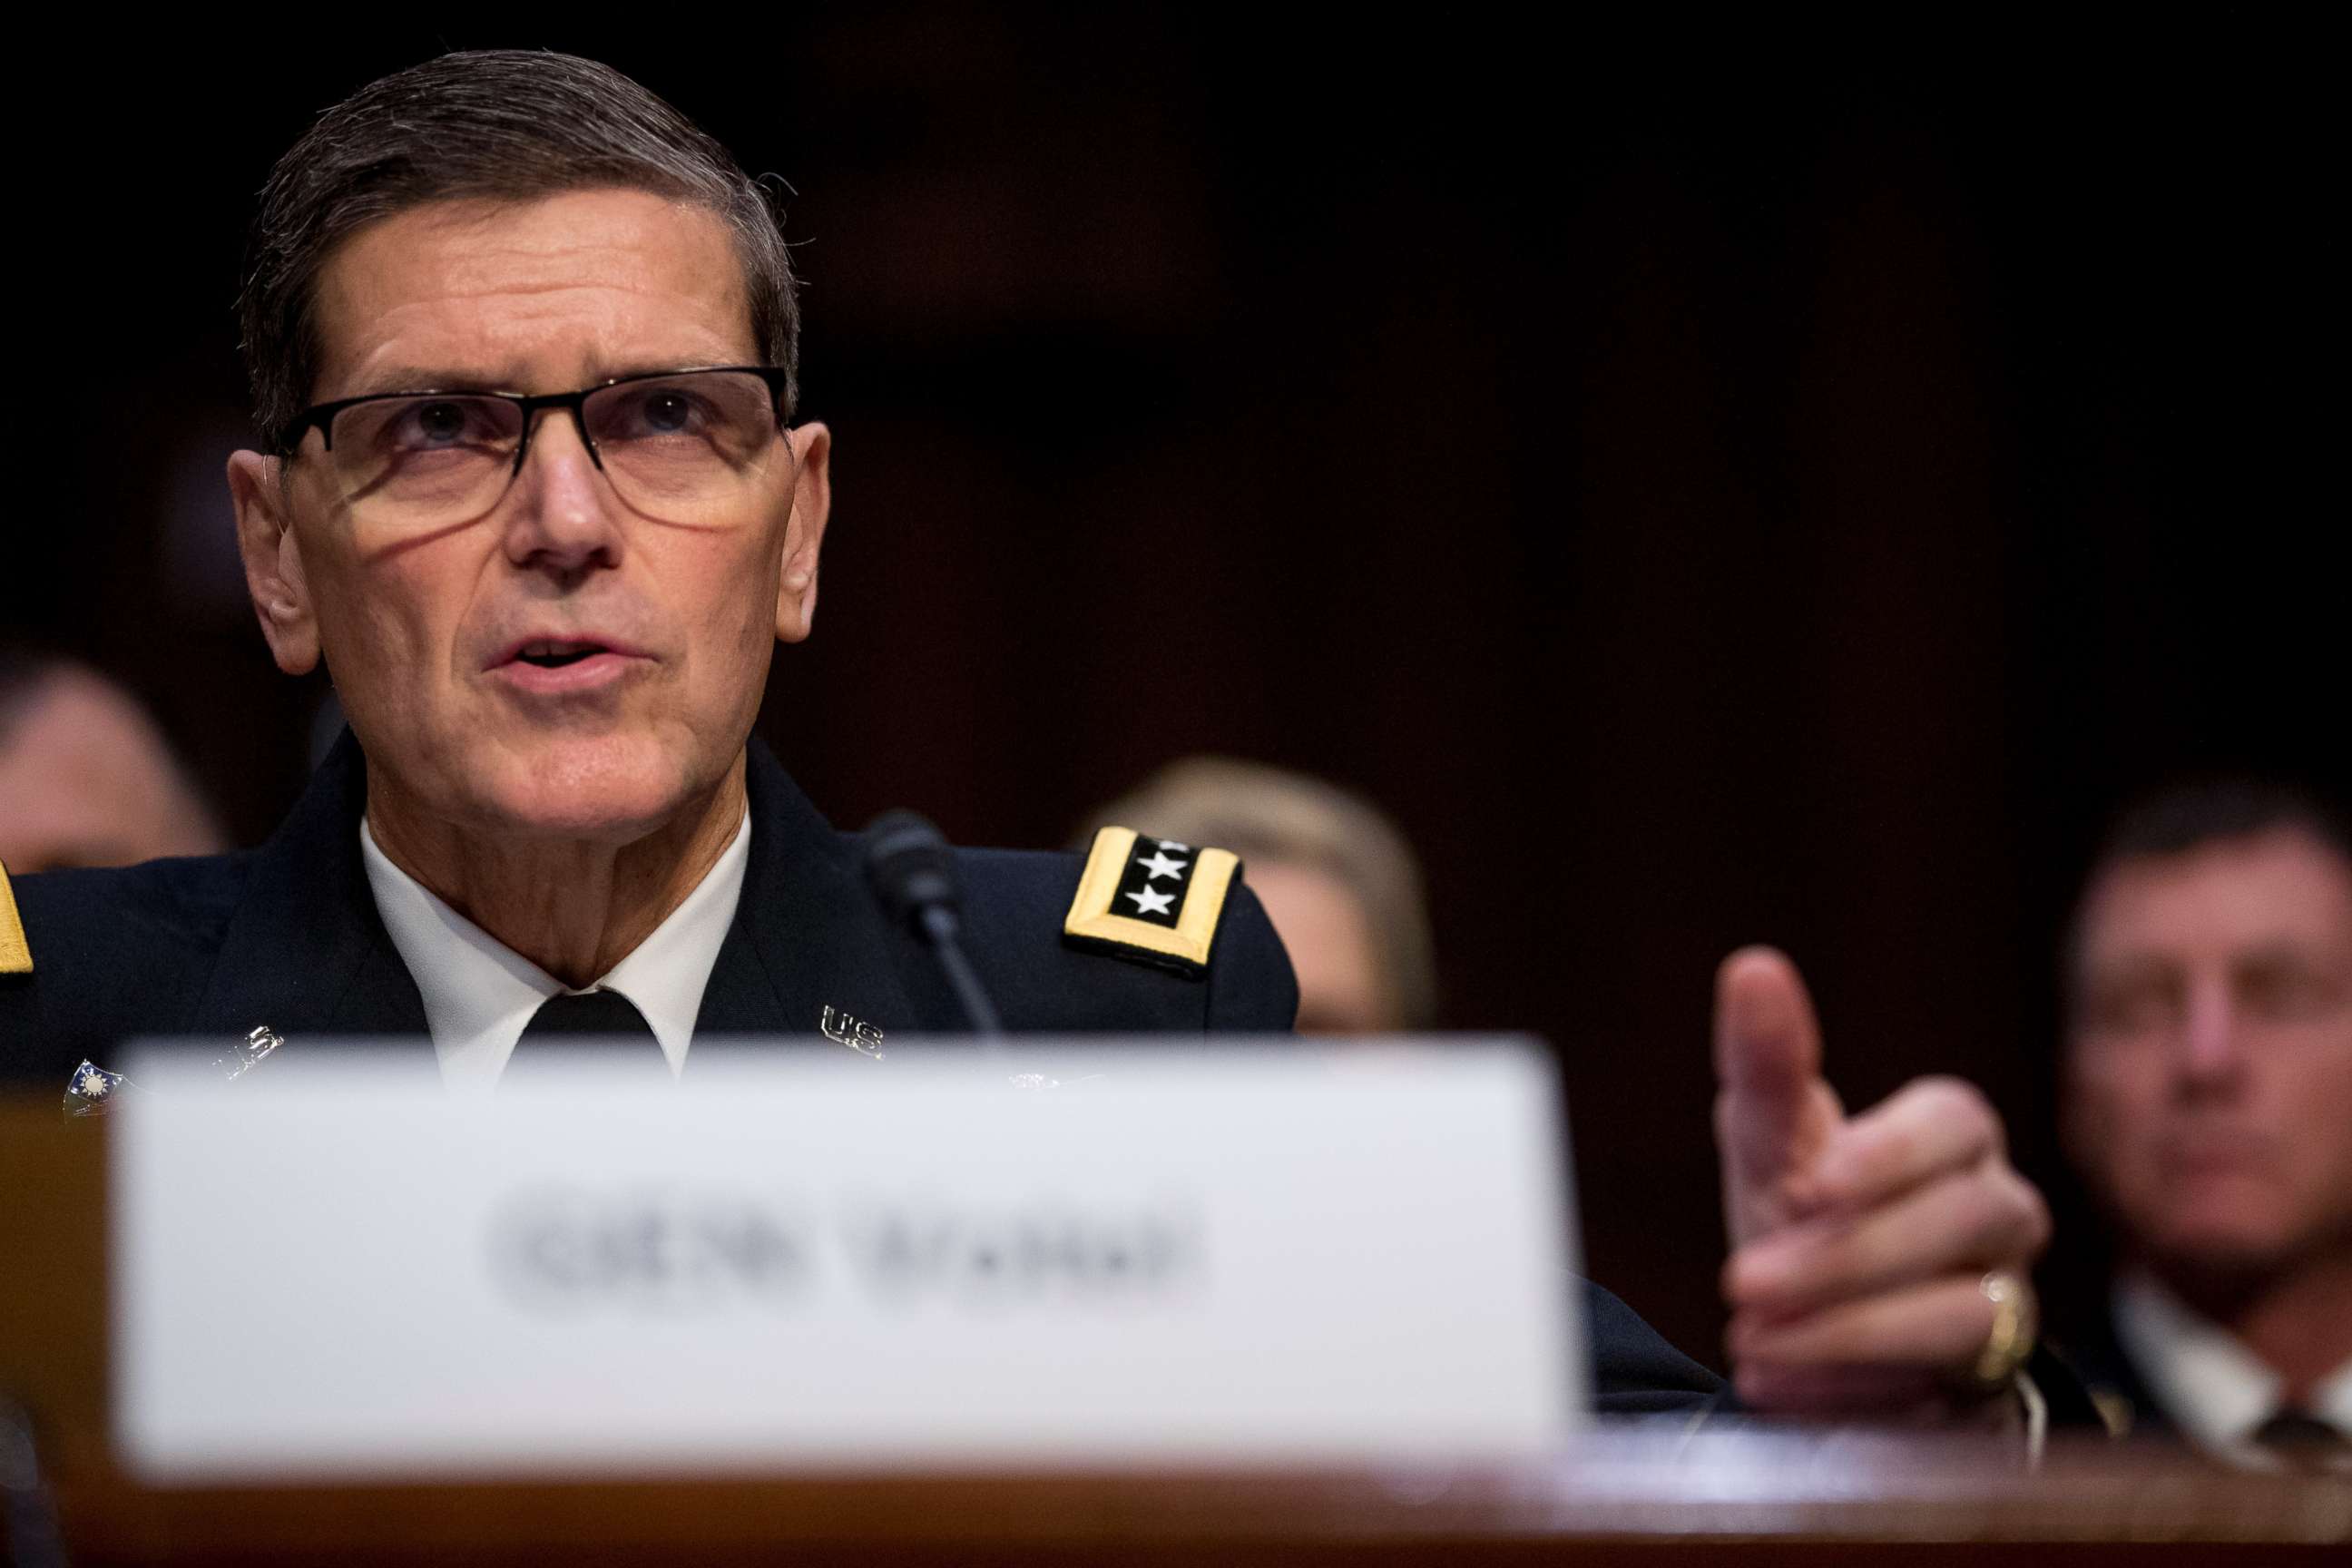 PHOTO: U.S. Central Command Commander Gen. Joseph Votel appears at a Senate Armed Services Committee hearing on Capitol Hill, Feb. 5, 2019.